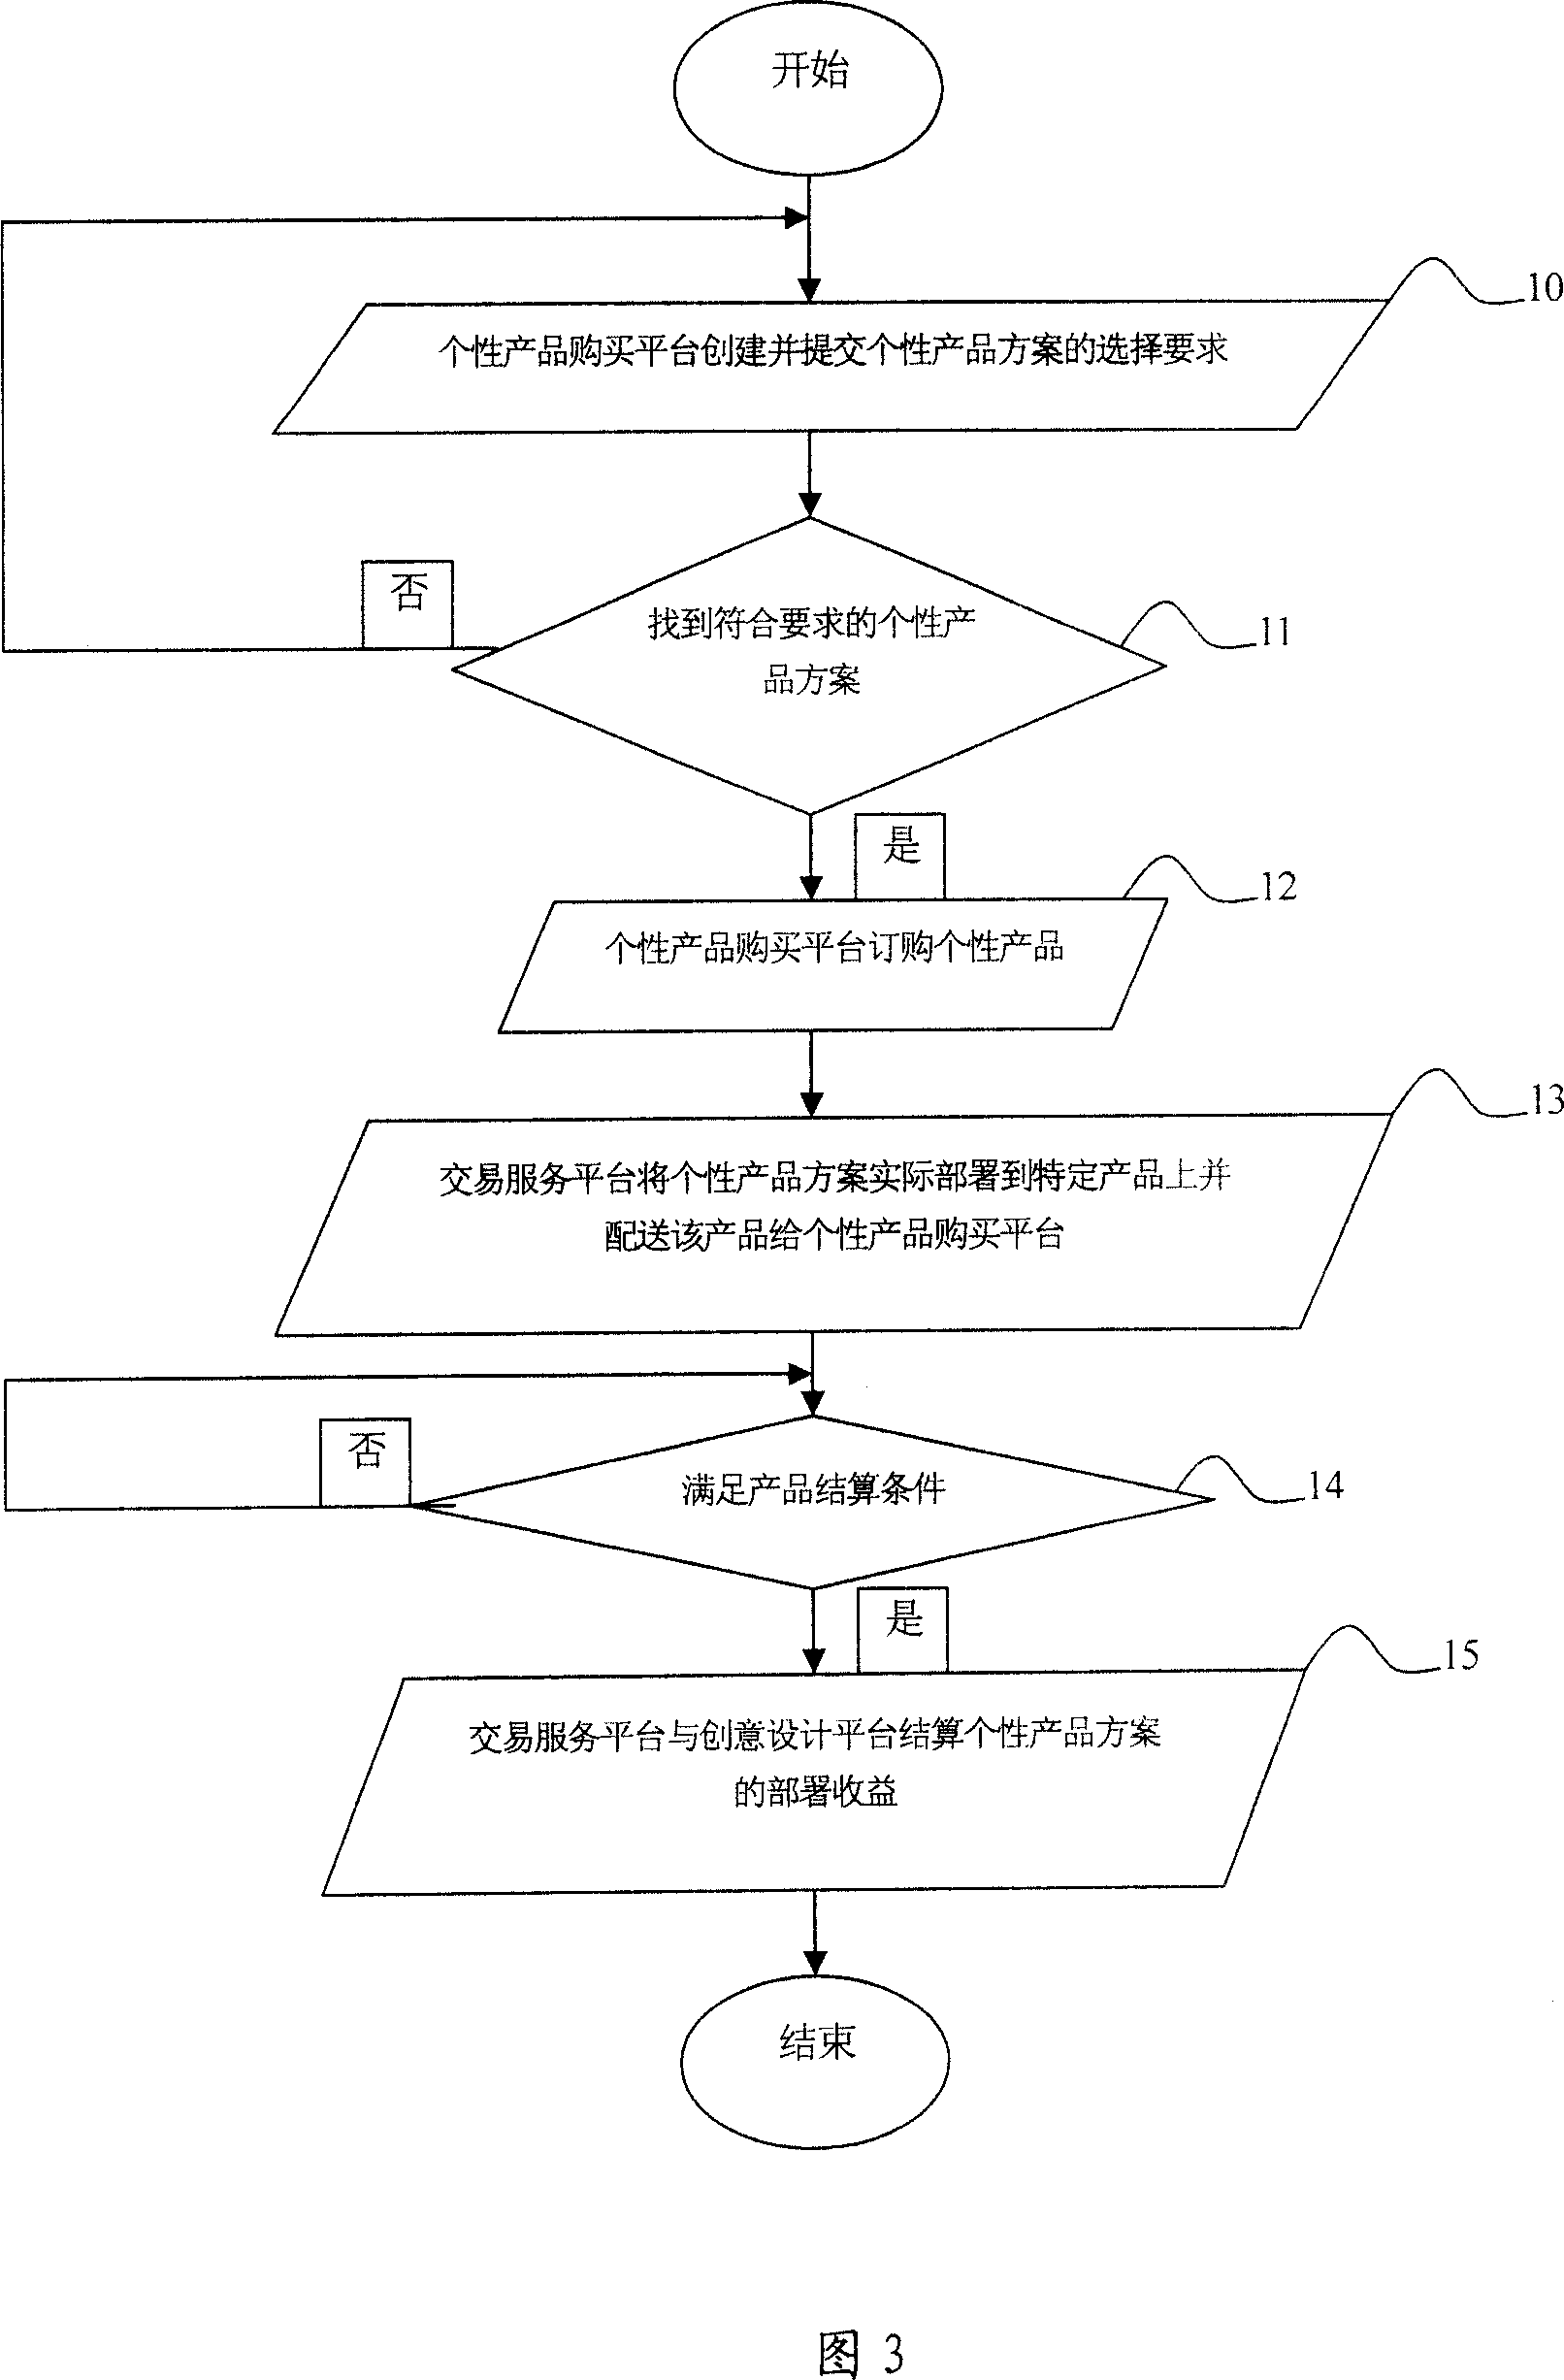 Method and system for trading and tailoring personalized products